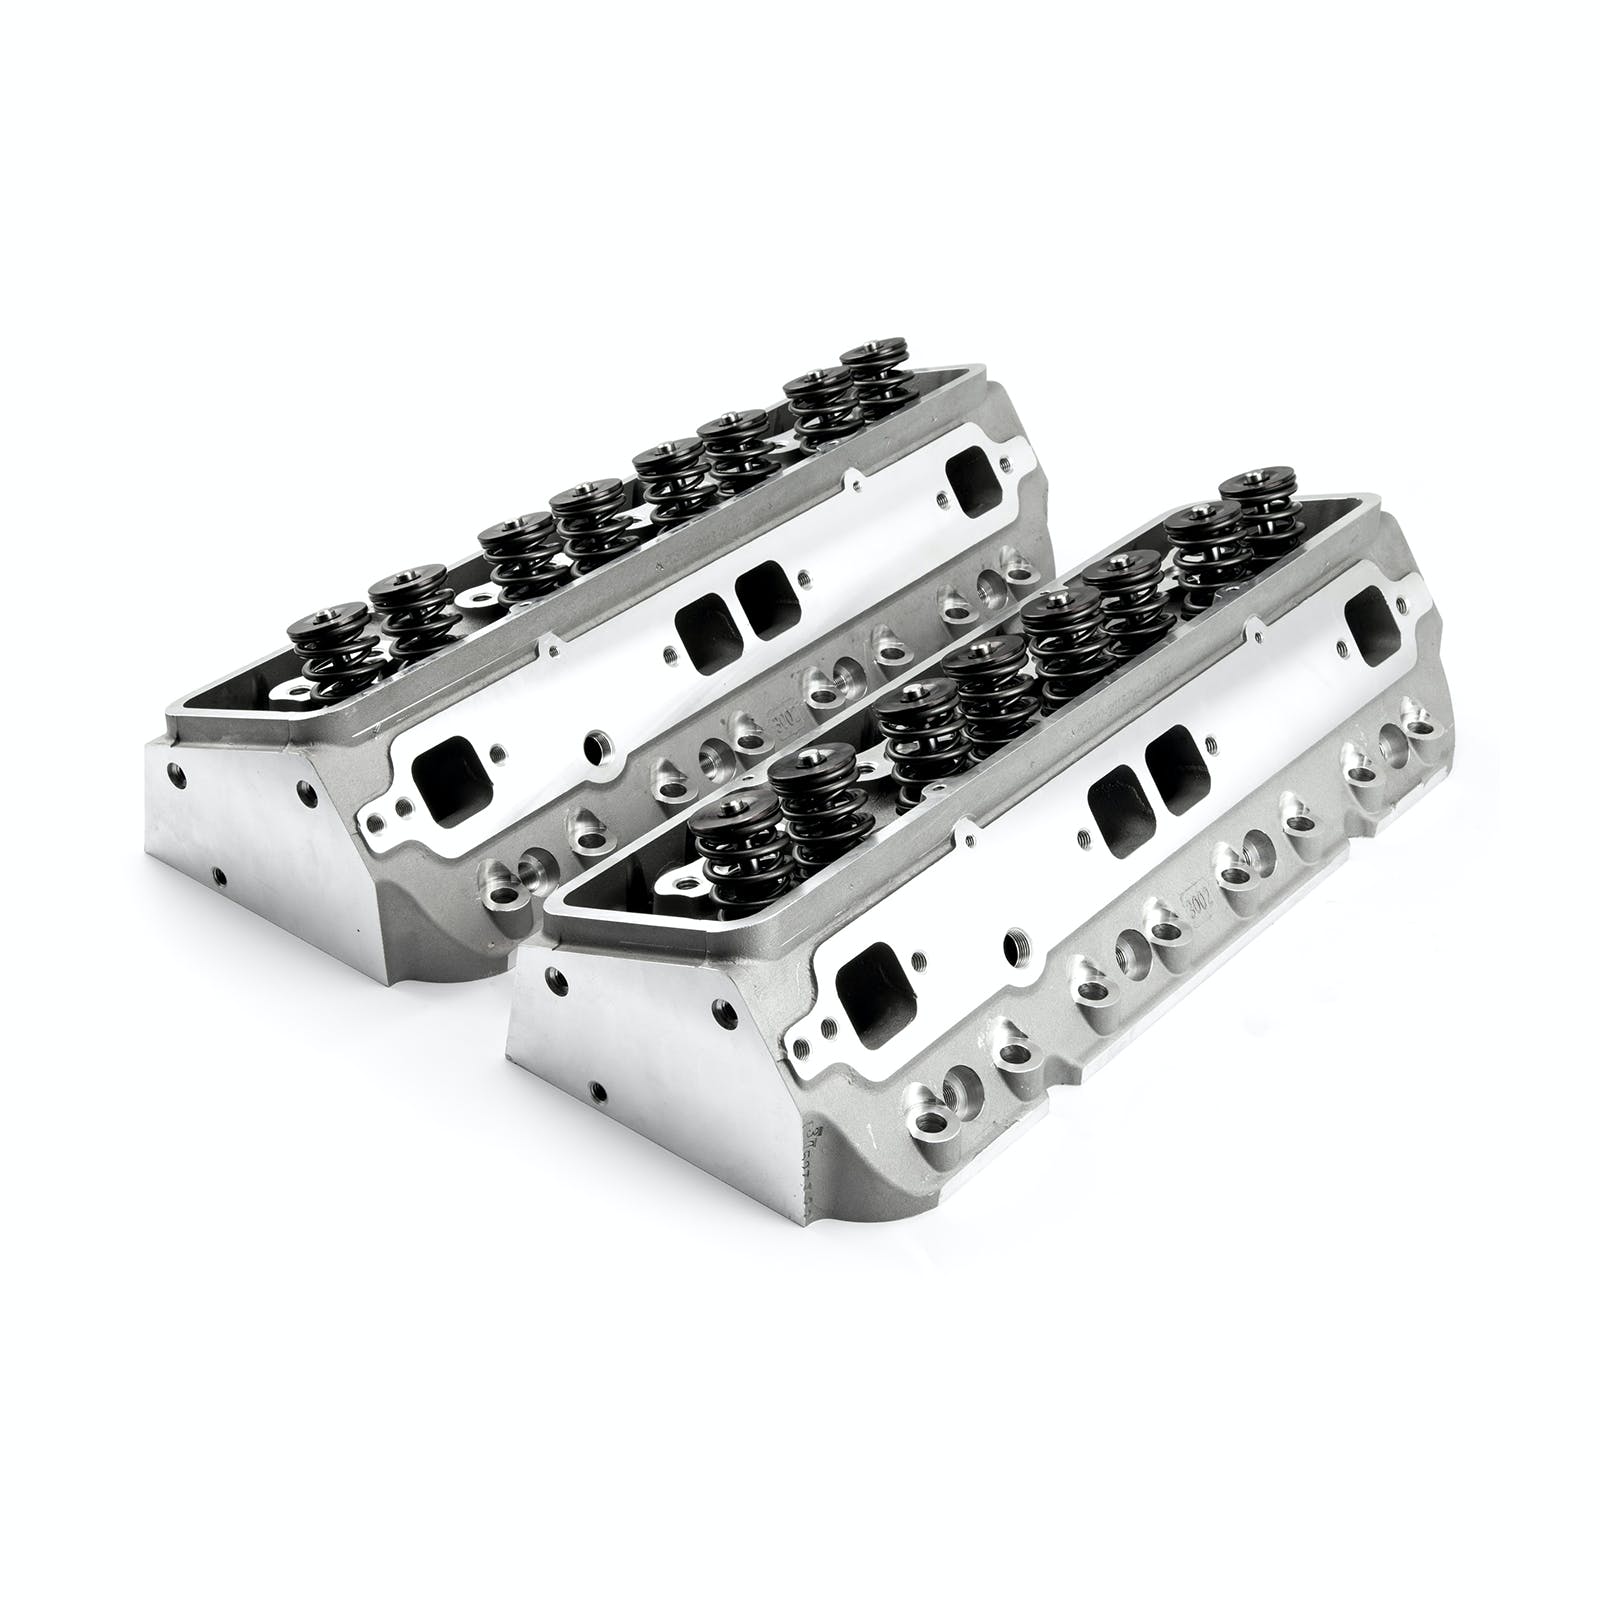 Speedmaster PCE281.2008 205cc 64cc Angle Solid-FT Complete Aluminum Cylinder Heads